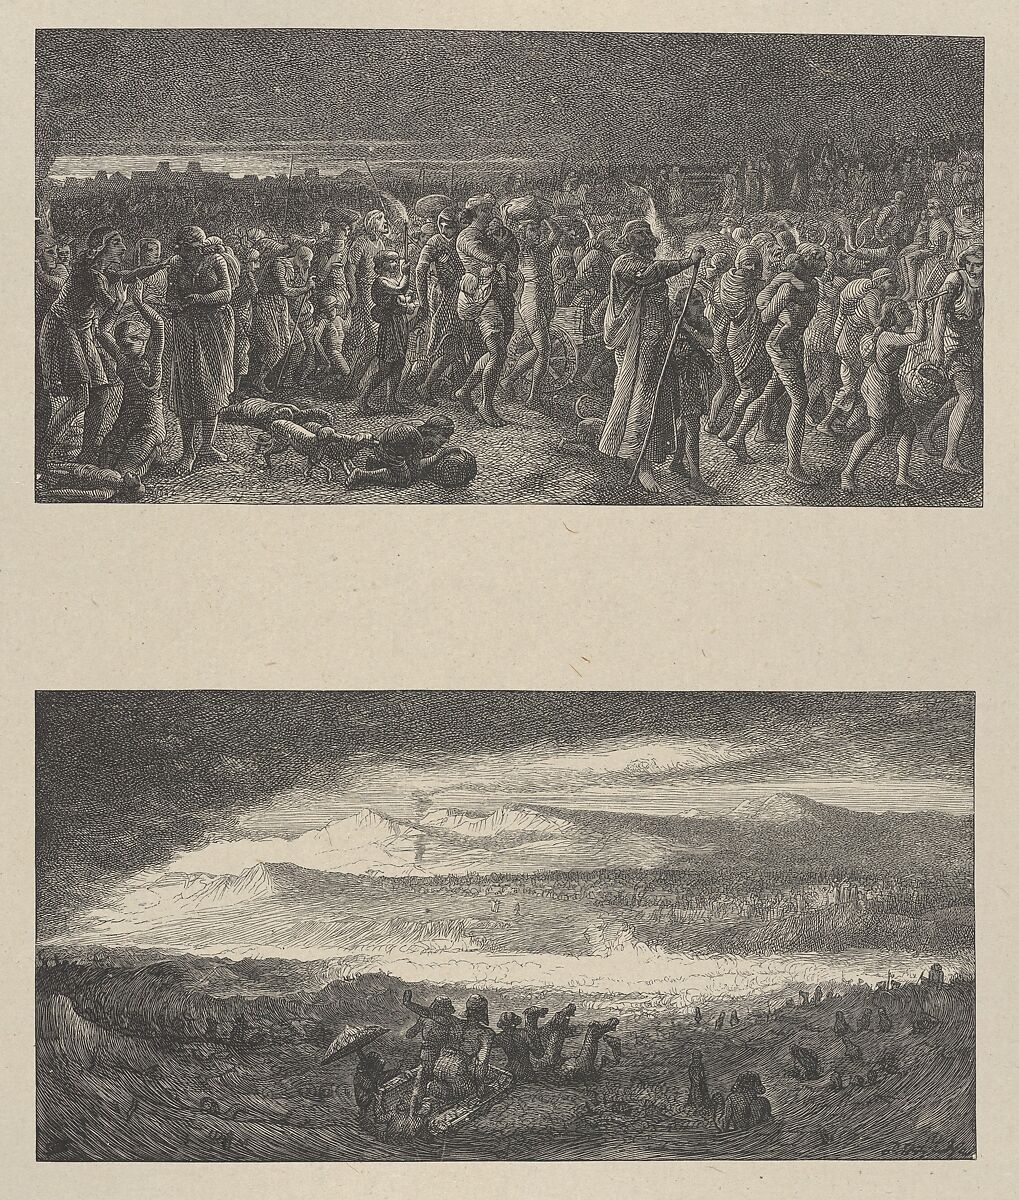 The Departure of the Israelites–Destruction of Pharoah and His Host, from "Dalziels' Bible Gallery", After Thomas Dalziel (British, Wooler, Northumberland 1823–1906 Herne Bay, Kent), Wood engraving on India paper, mounted on thin card 